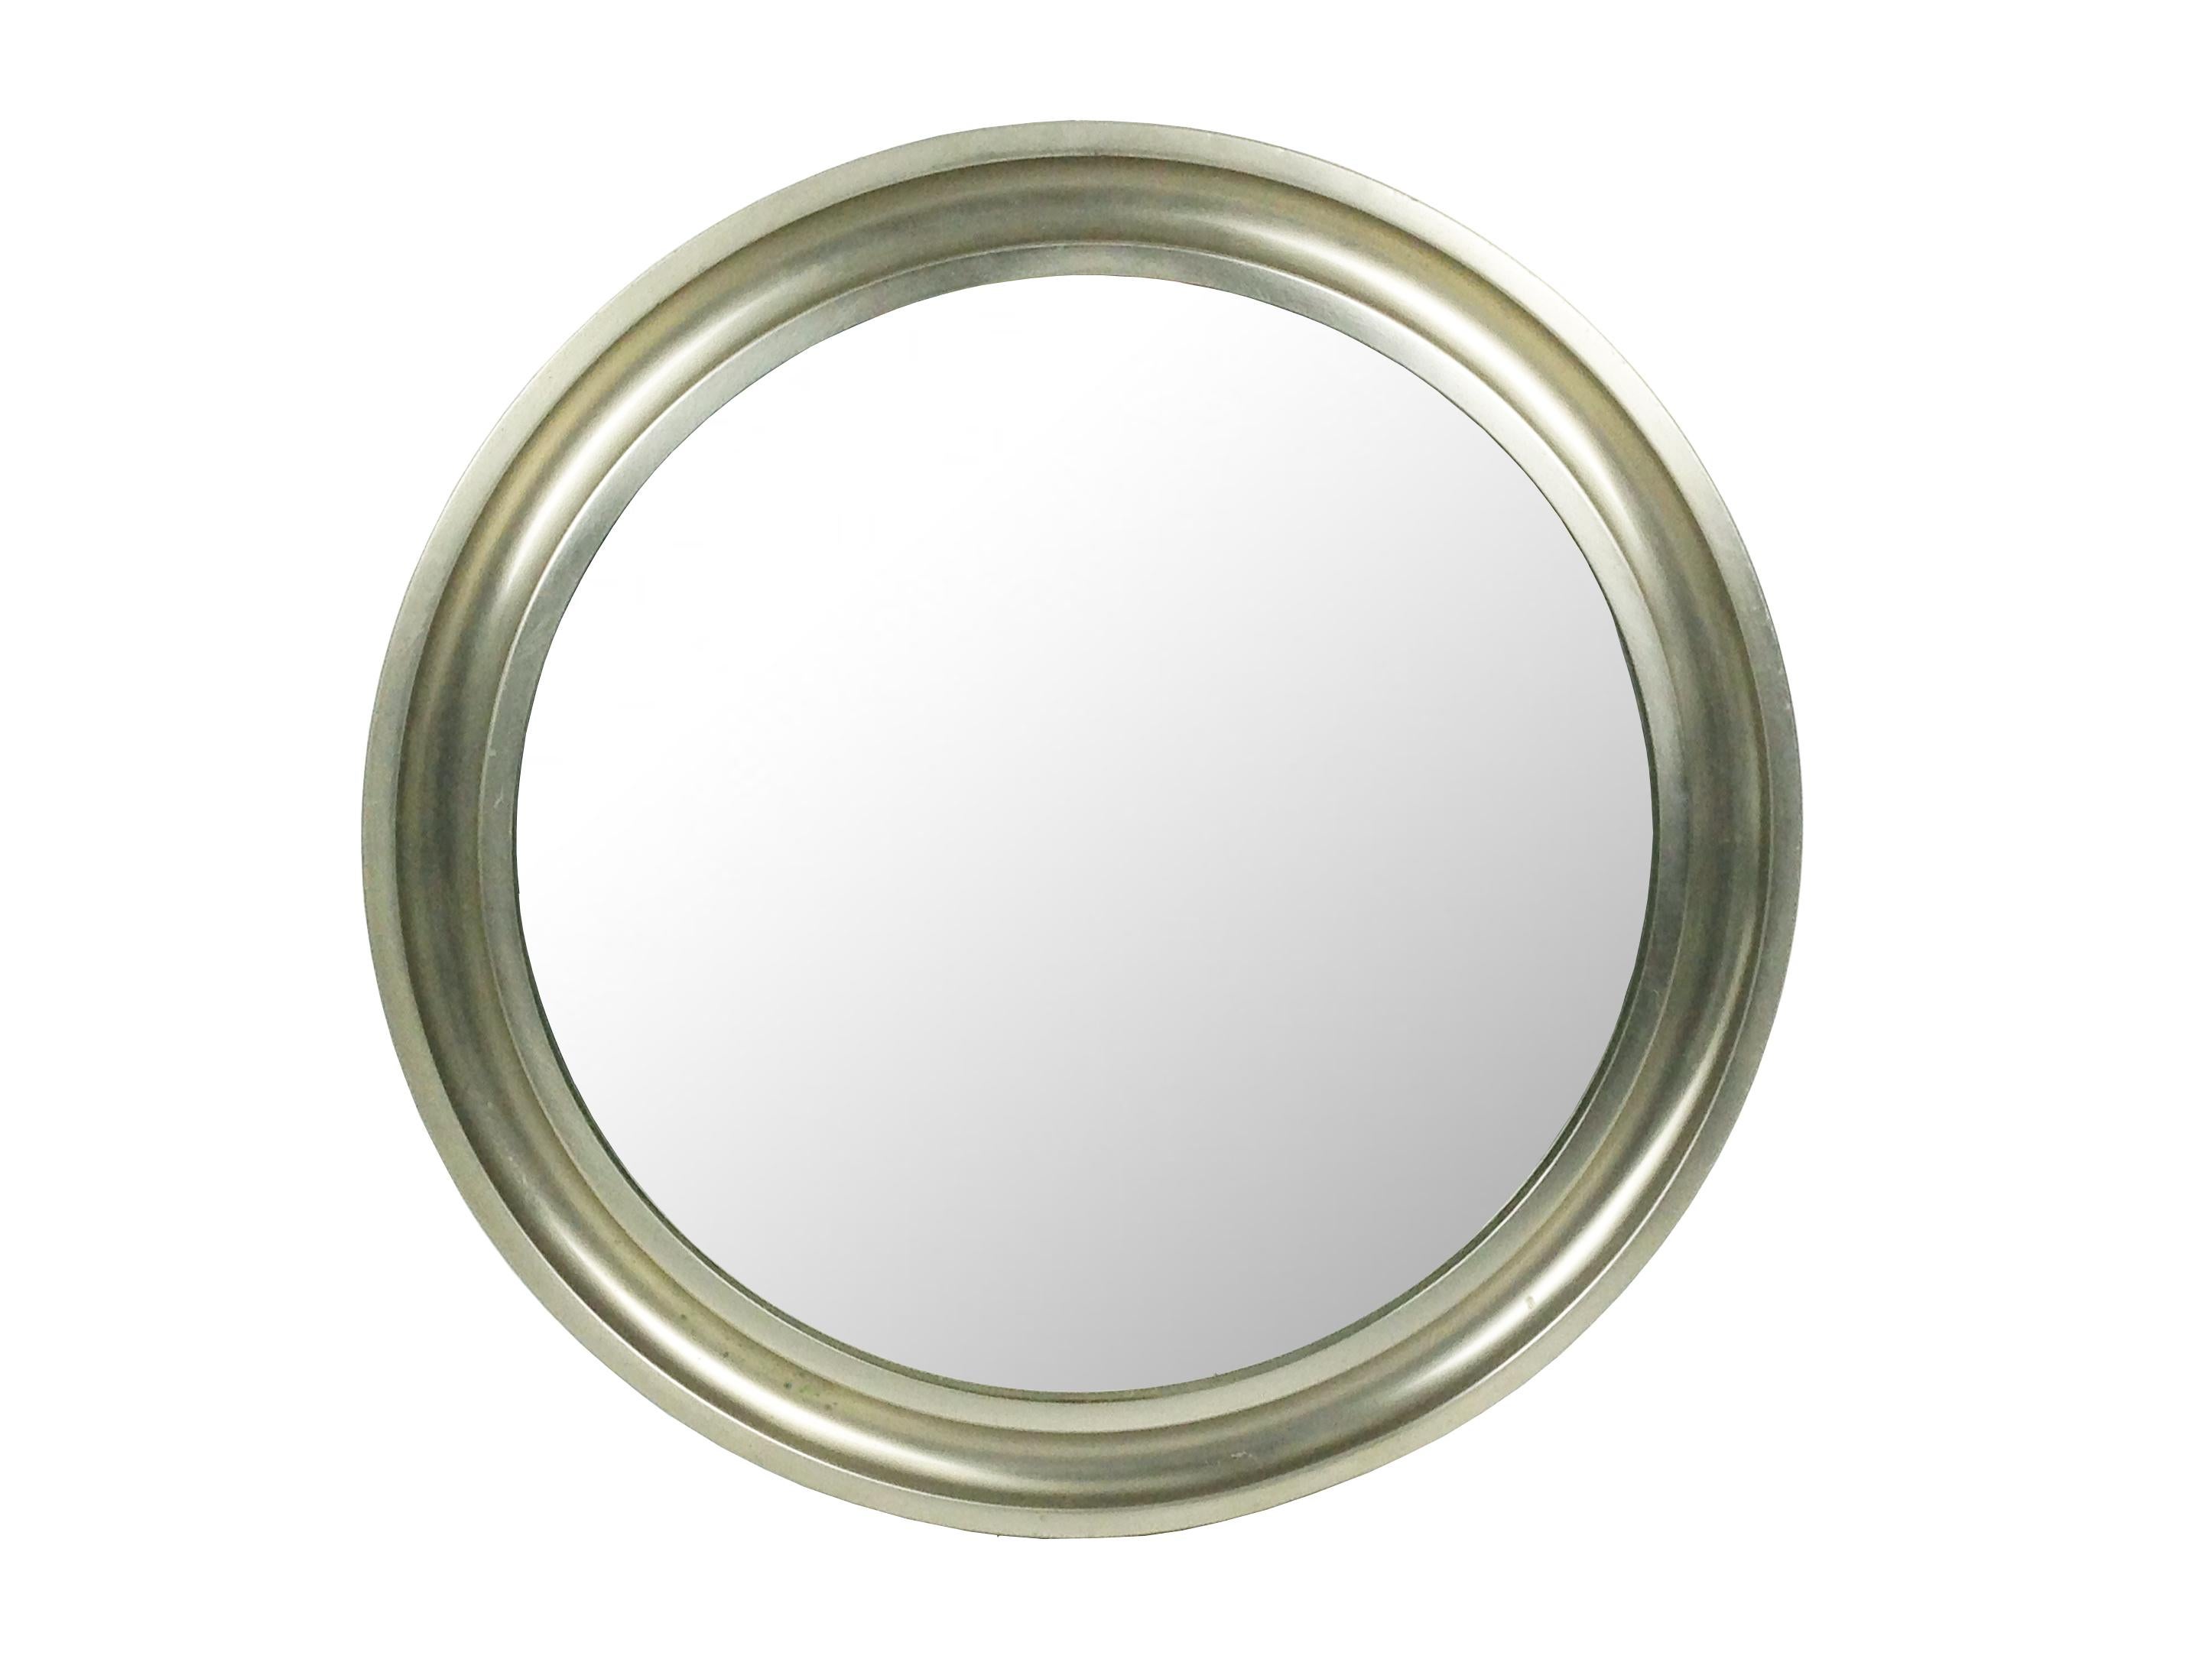 These wall mirrors are made from a nickel-plated brass circular frame with brushed finishing and a black metal back. They remain in overall very good condition, but one mirror shows one light dent on the edge which causes a slight deformation of the